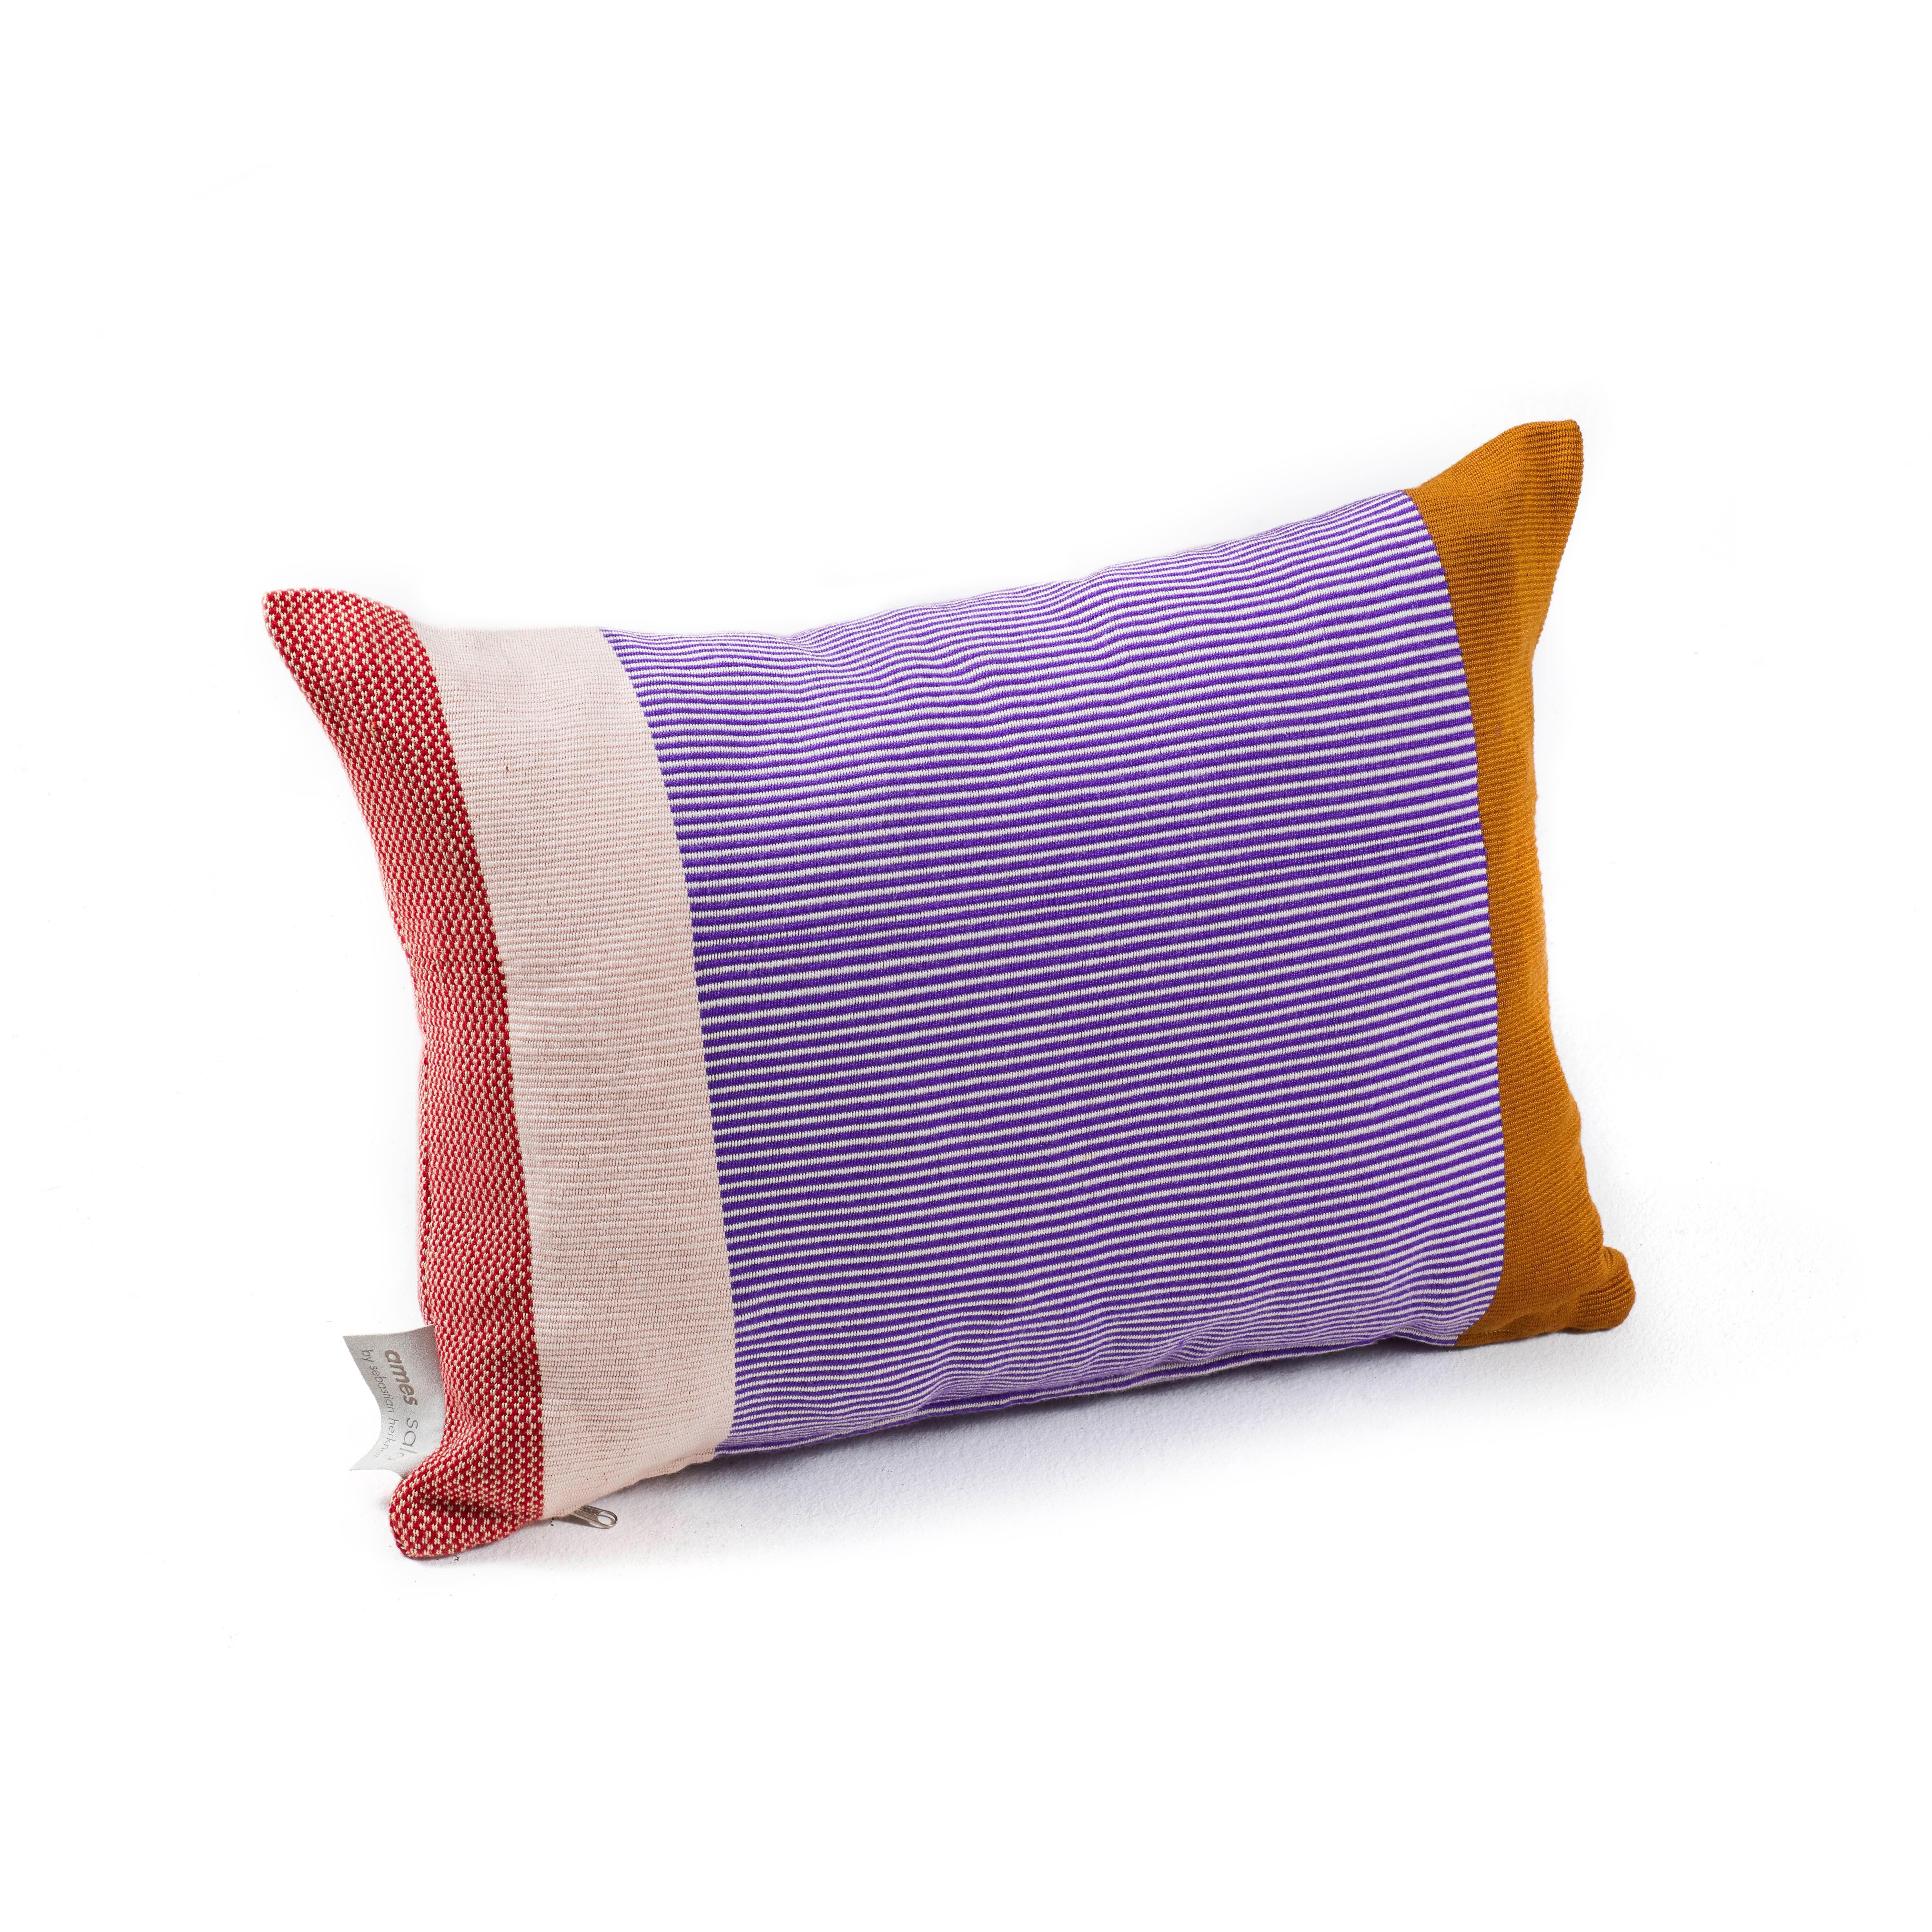 Maraca pillow 2 by Sebastian Herkner
Materials: 100% cotton. 
Technique: Hand-woven in Colombia. 
Dimensions: W 60 x H 40 cm 
Available in colors: green / purple / red, orange / gold / red, gold / purple / red. 

With their strong color-blocking,